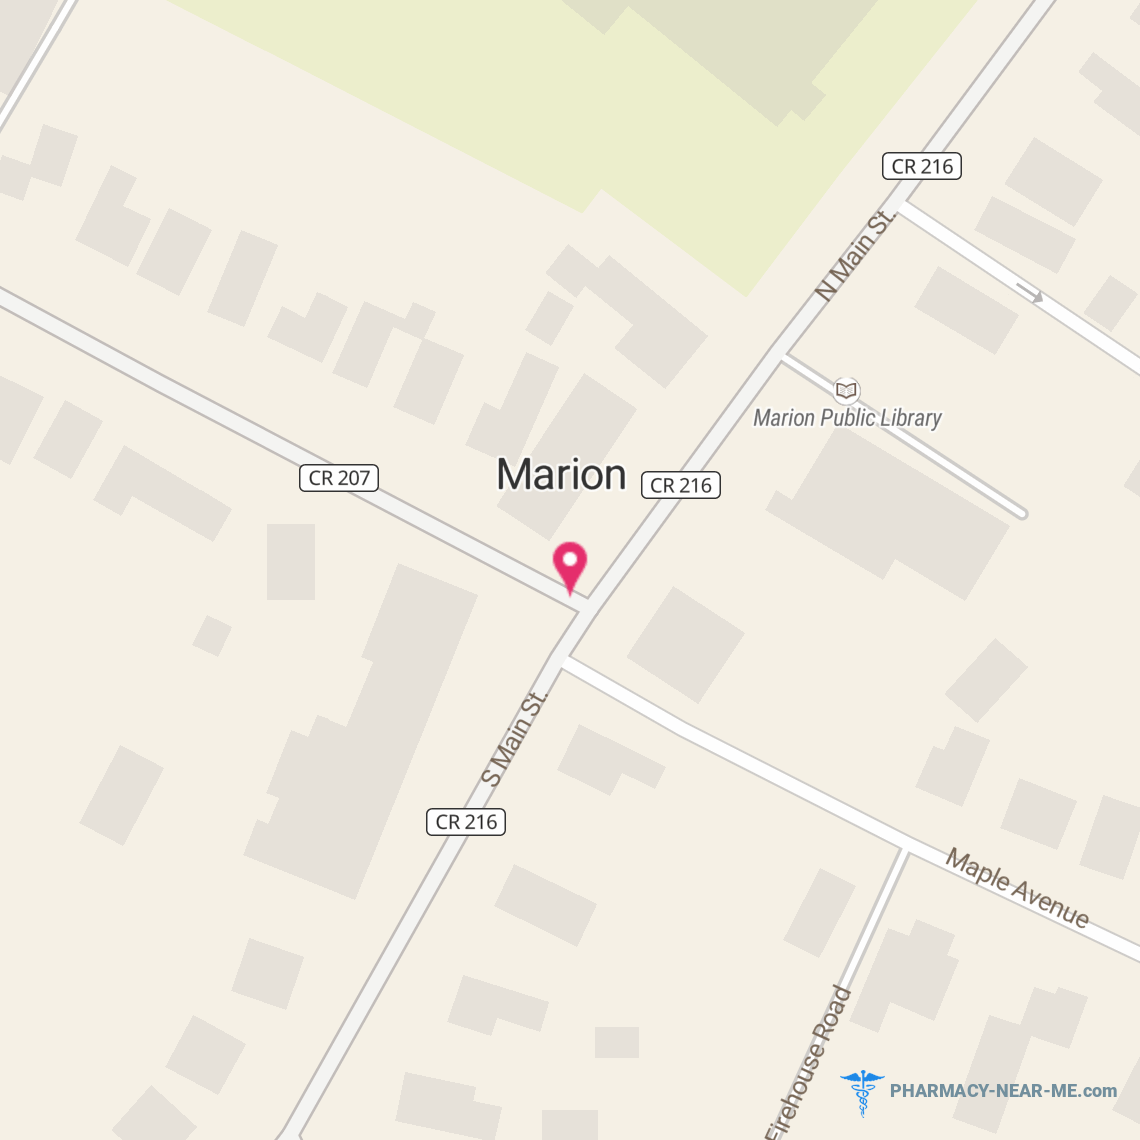 MARION PHARMACY, INC. - Pharmacy Hours, Phone, Reviews & Information: 3803 South Main Street, Marion, New York 14505, United States